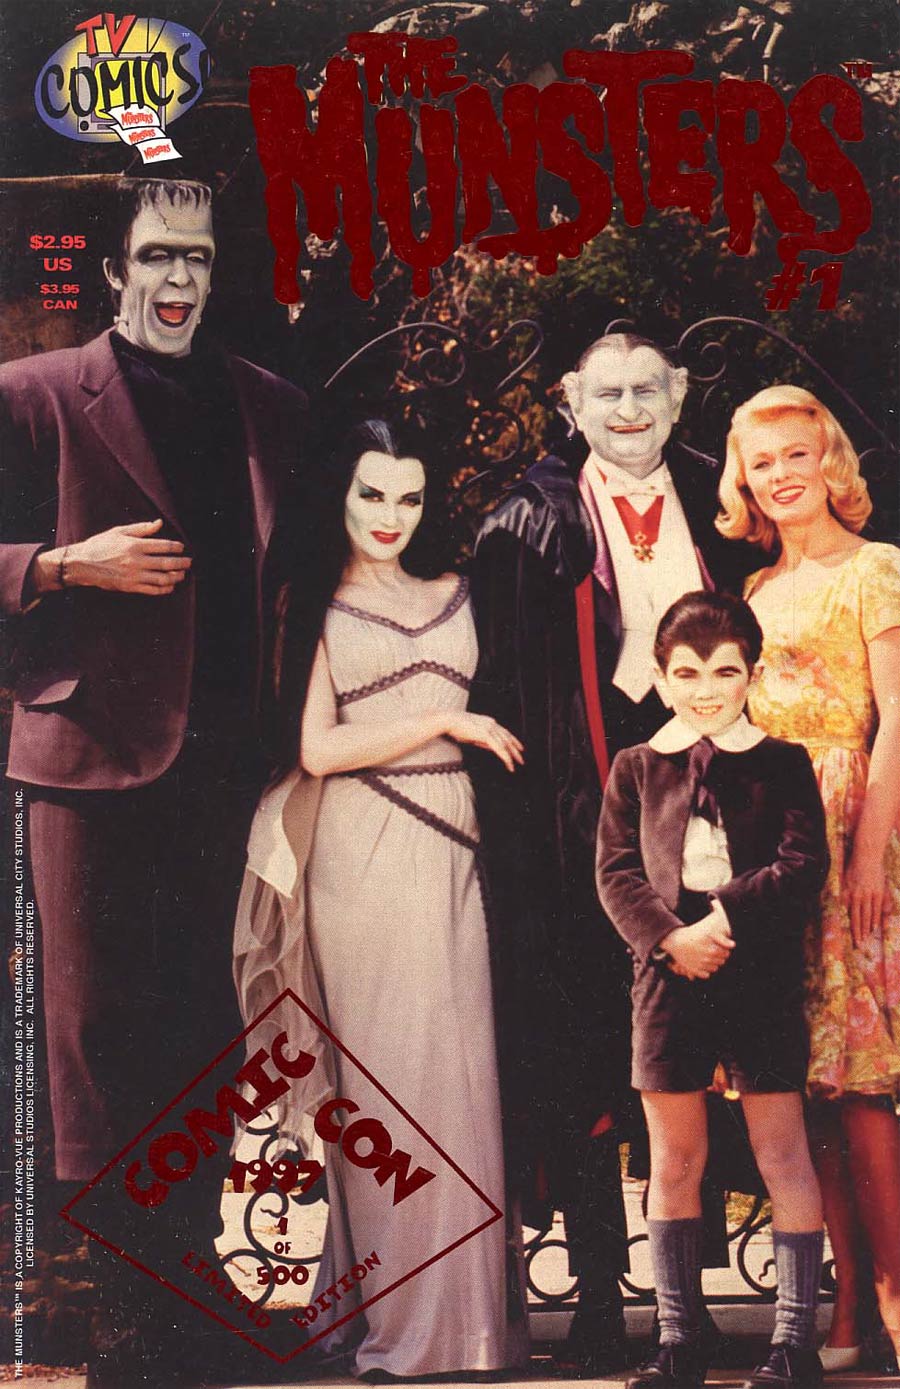 Munsters Special #Comic Con Ed.